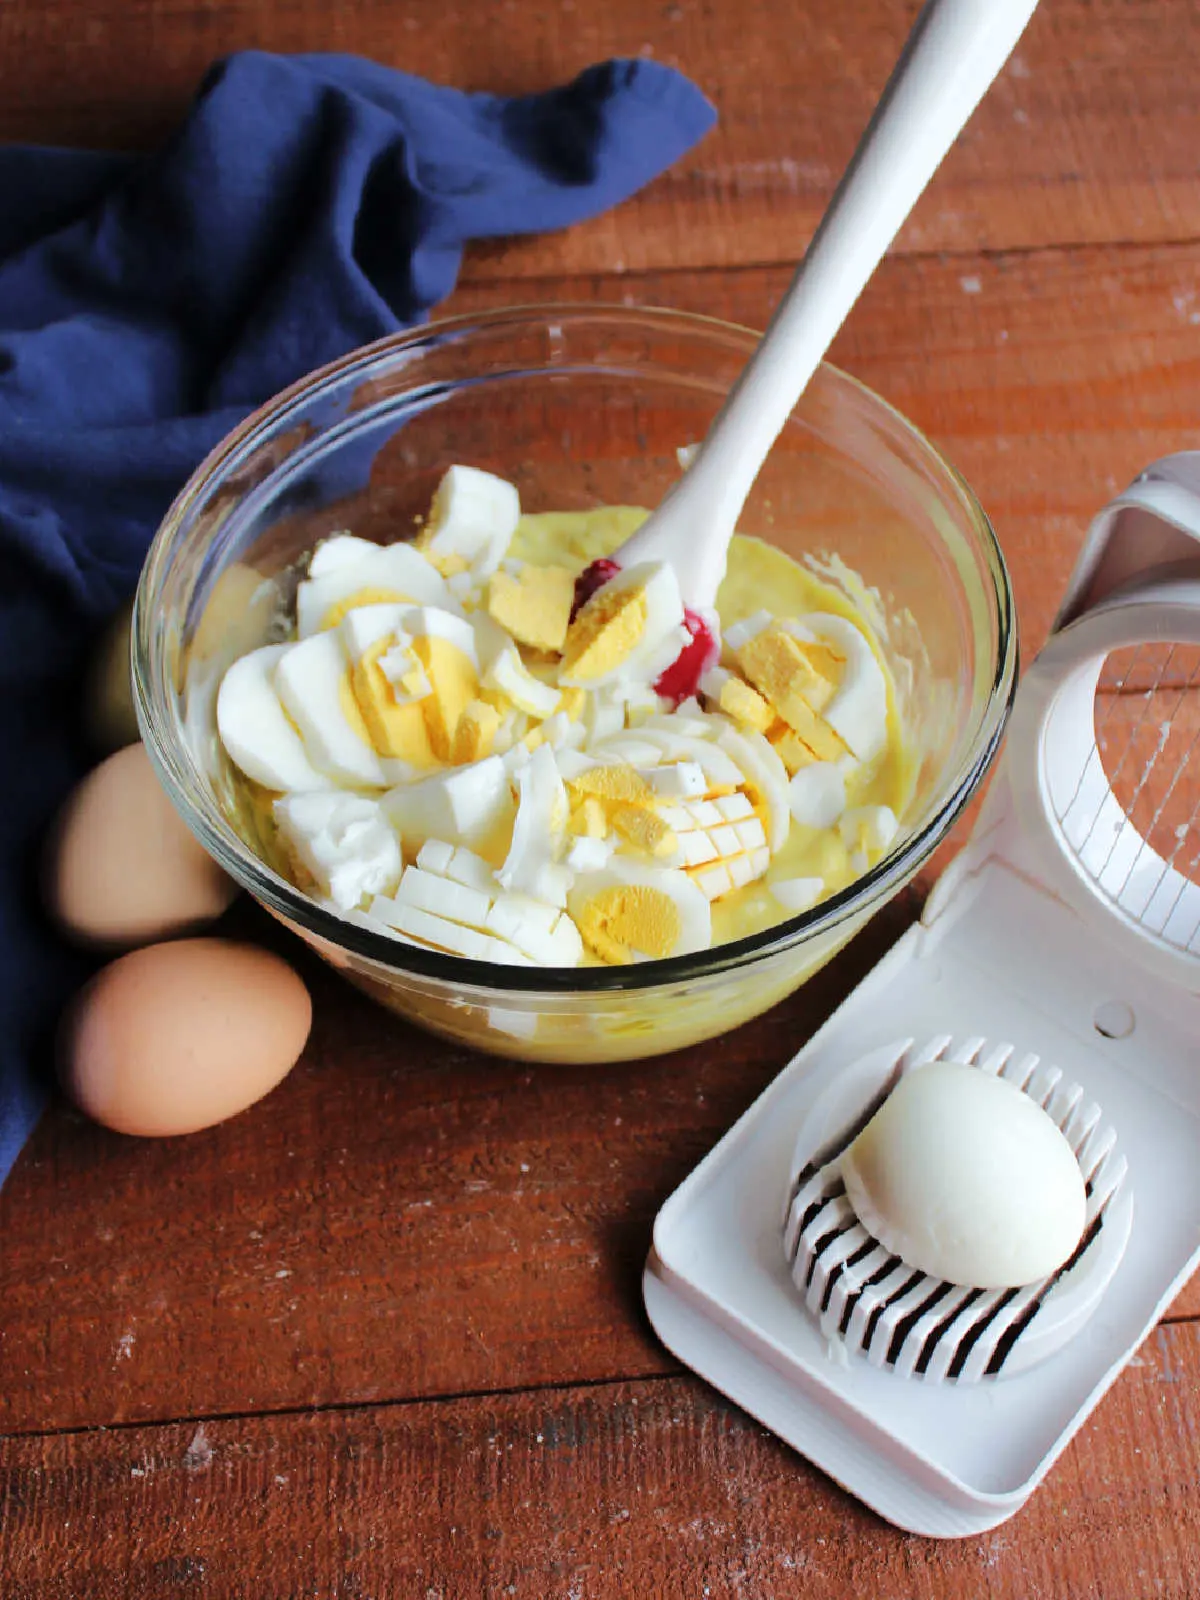 Adding chopped hard boiled eggs to the bowl of dressing mixture.